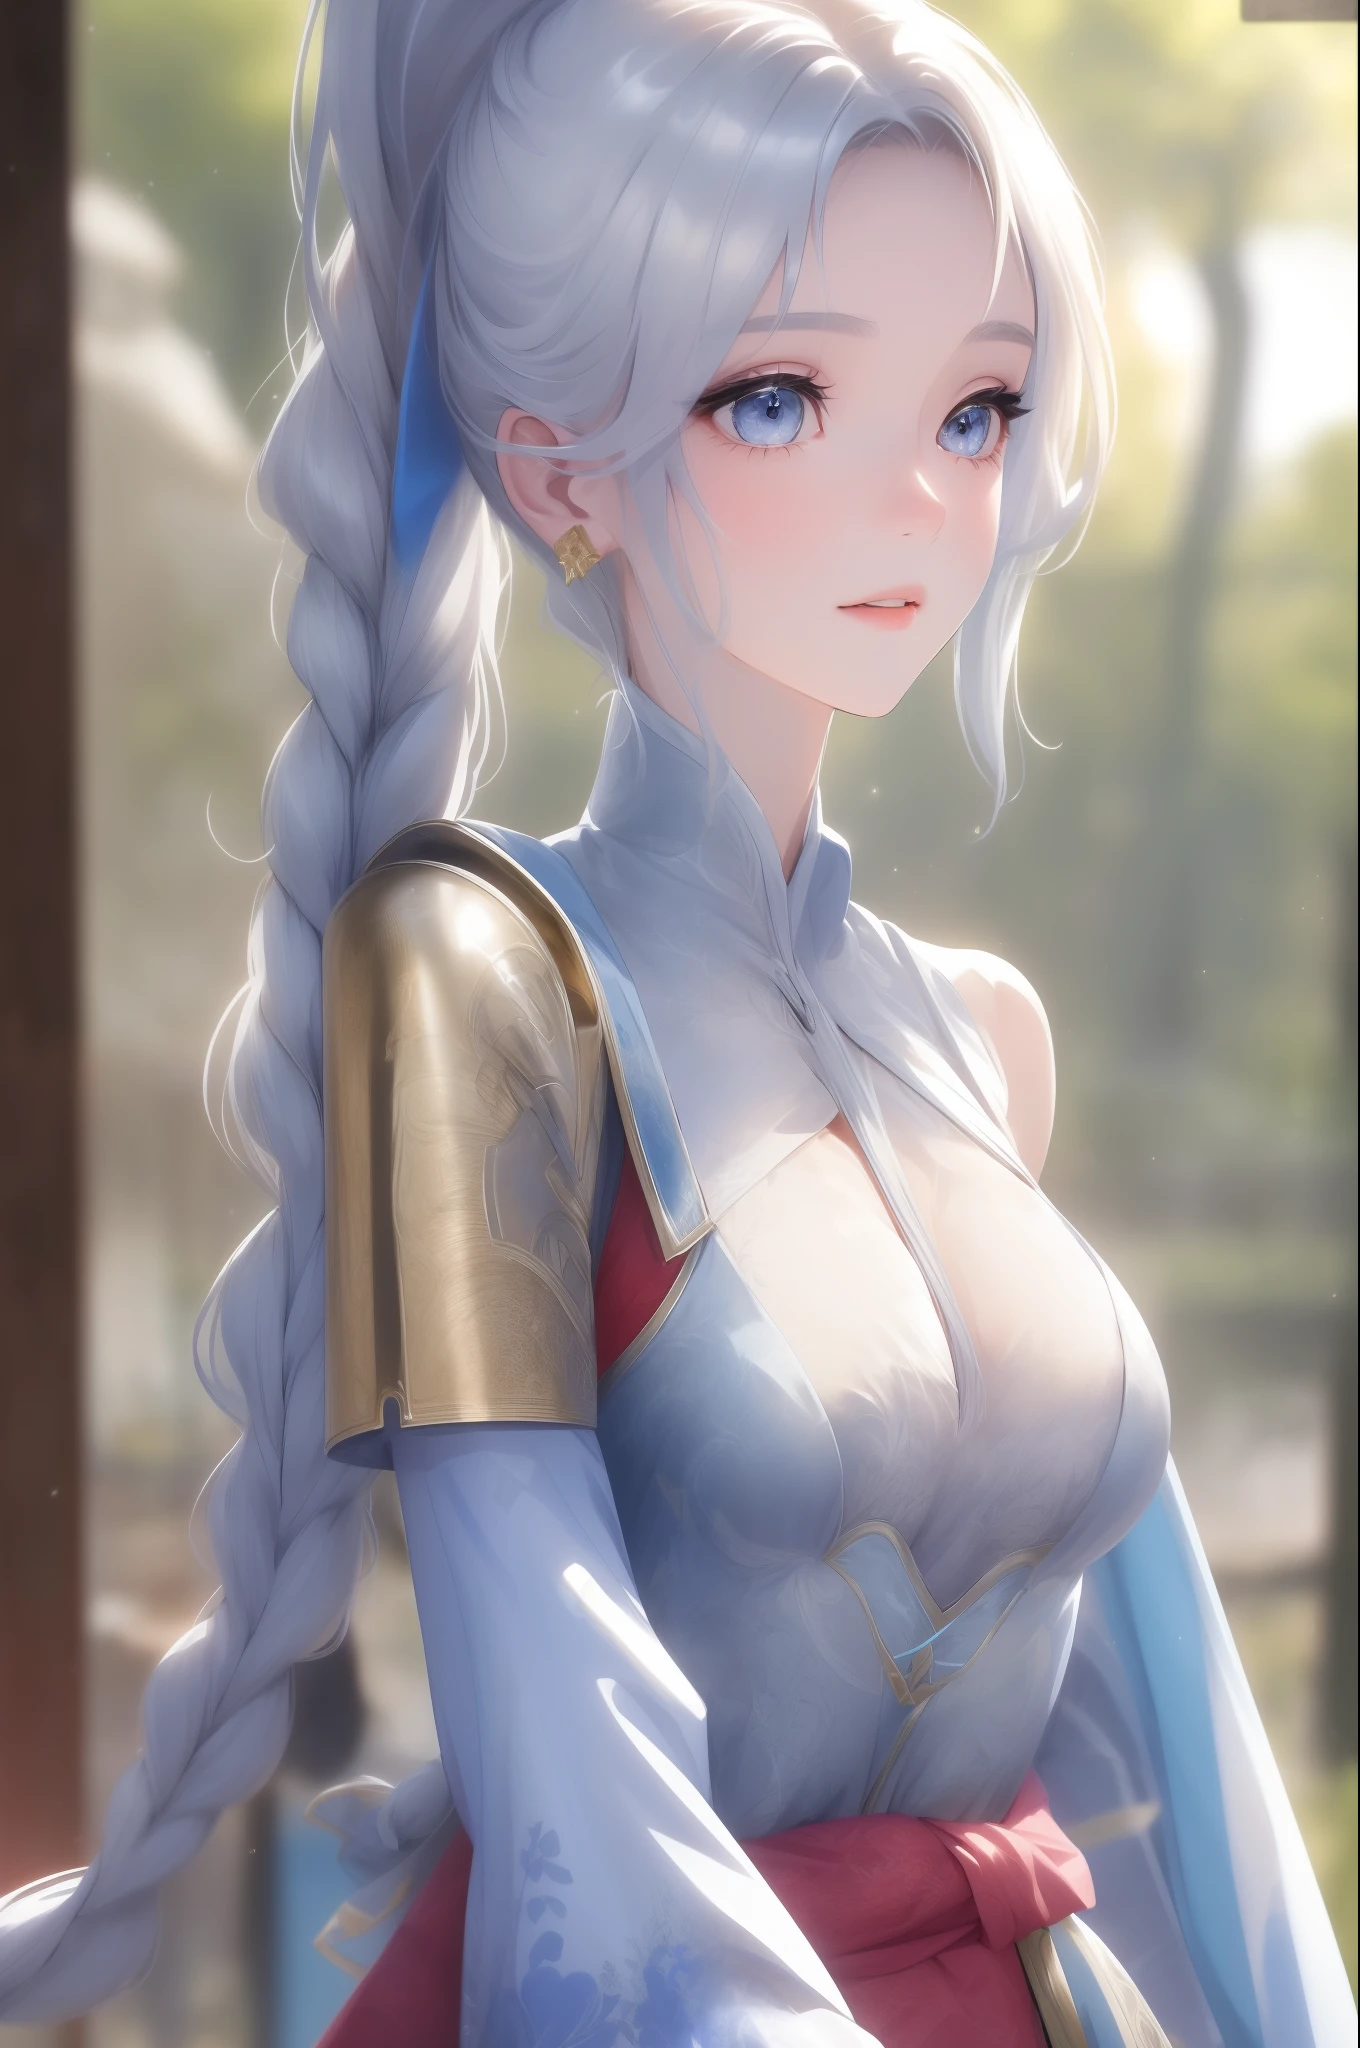 (best quality,masterpiece:1.2), 1girl, long hair ponytail, beautiful blue eyes, elegant silver wavy hair, intricate braid, flowing dress, medium-sized breasts, radiant smile, delicate features, 
(depth of field:1.1), tranquil forest, vast open field, dappled sunlight, serene atmosphere, 
(knightly armor:1.1), polished armor, gleaming helmet, majestic sword, sturdy shield, 
(close up to upper body:1.1), detailed facial expression, refined skin texture, 
(vivid colors), vibrant hues, rich color palette, 
(bokeh:1.1), dreamy bokeh effect, soft focus background, perfect body